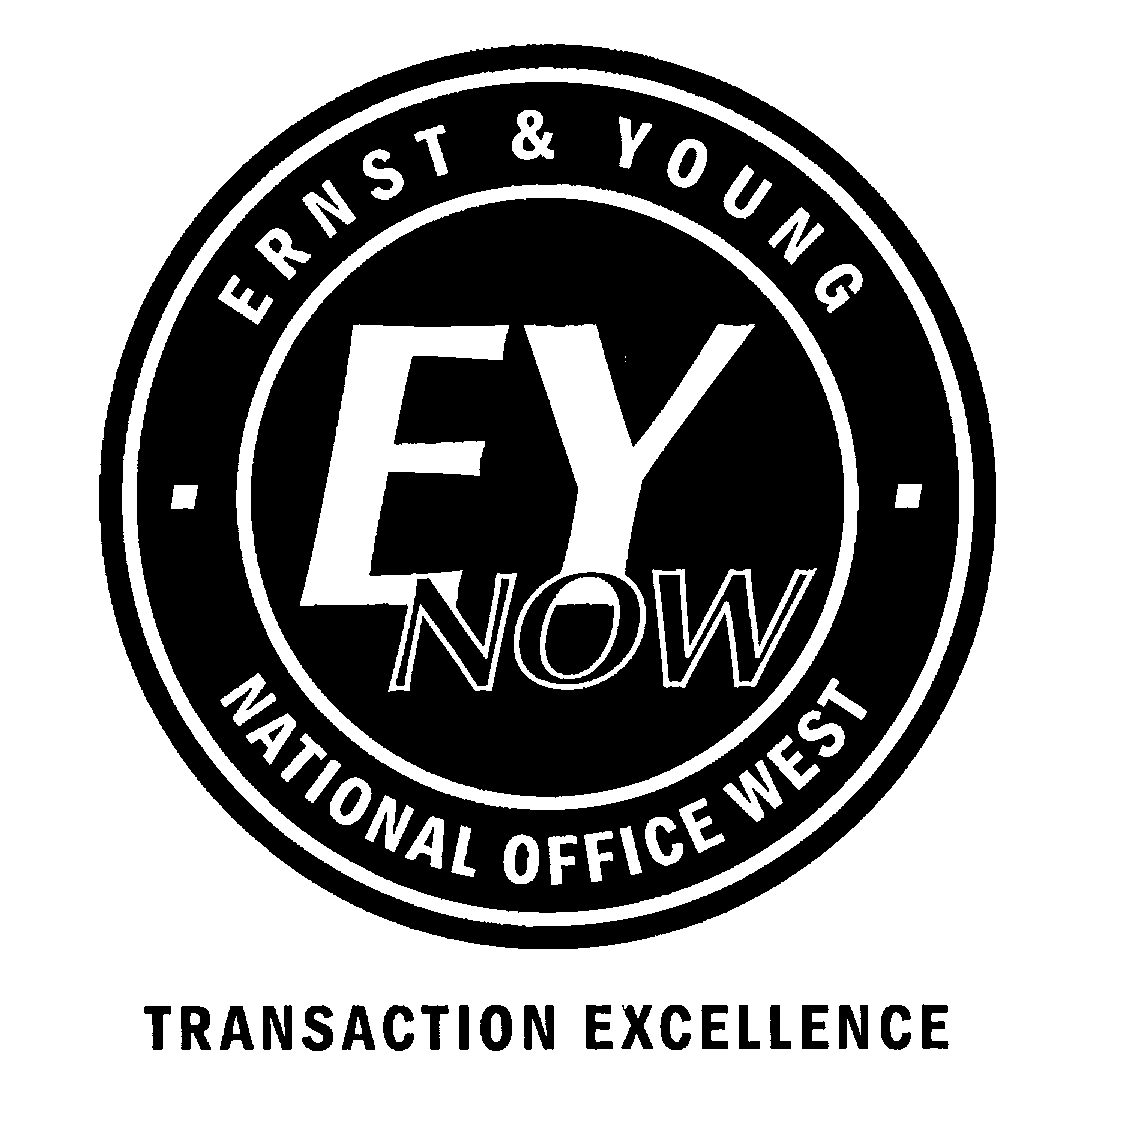  ERNST &amp; YOUNG EYNOW NATIONAL OFFICE WEST TRANSACTION EXCELLENCE